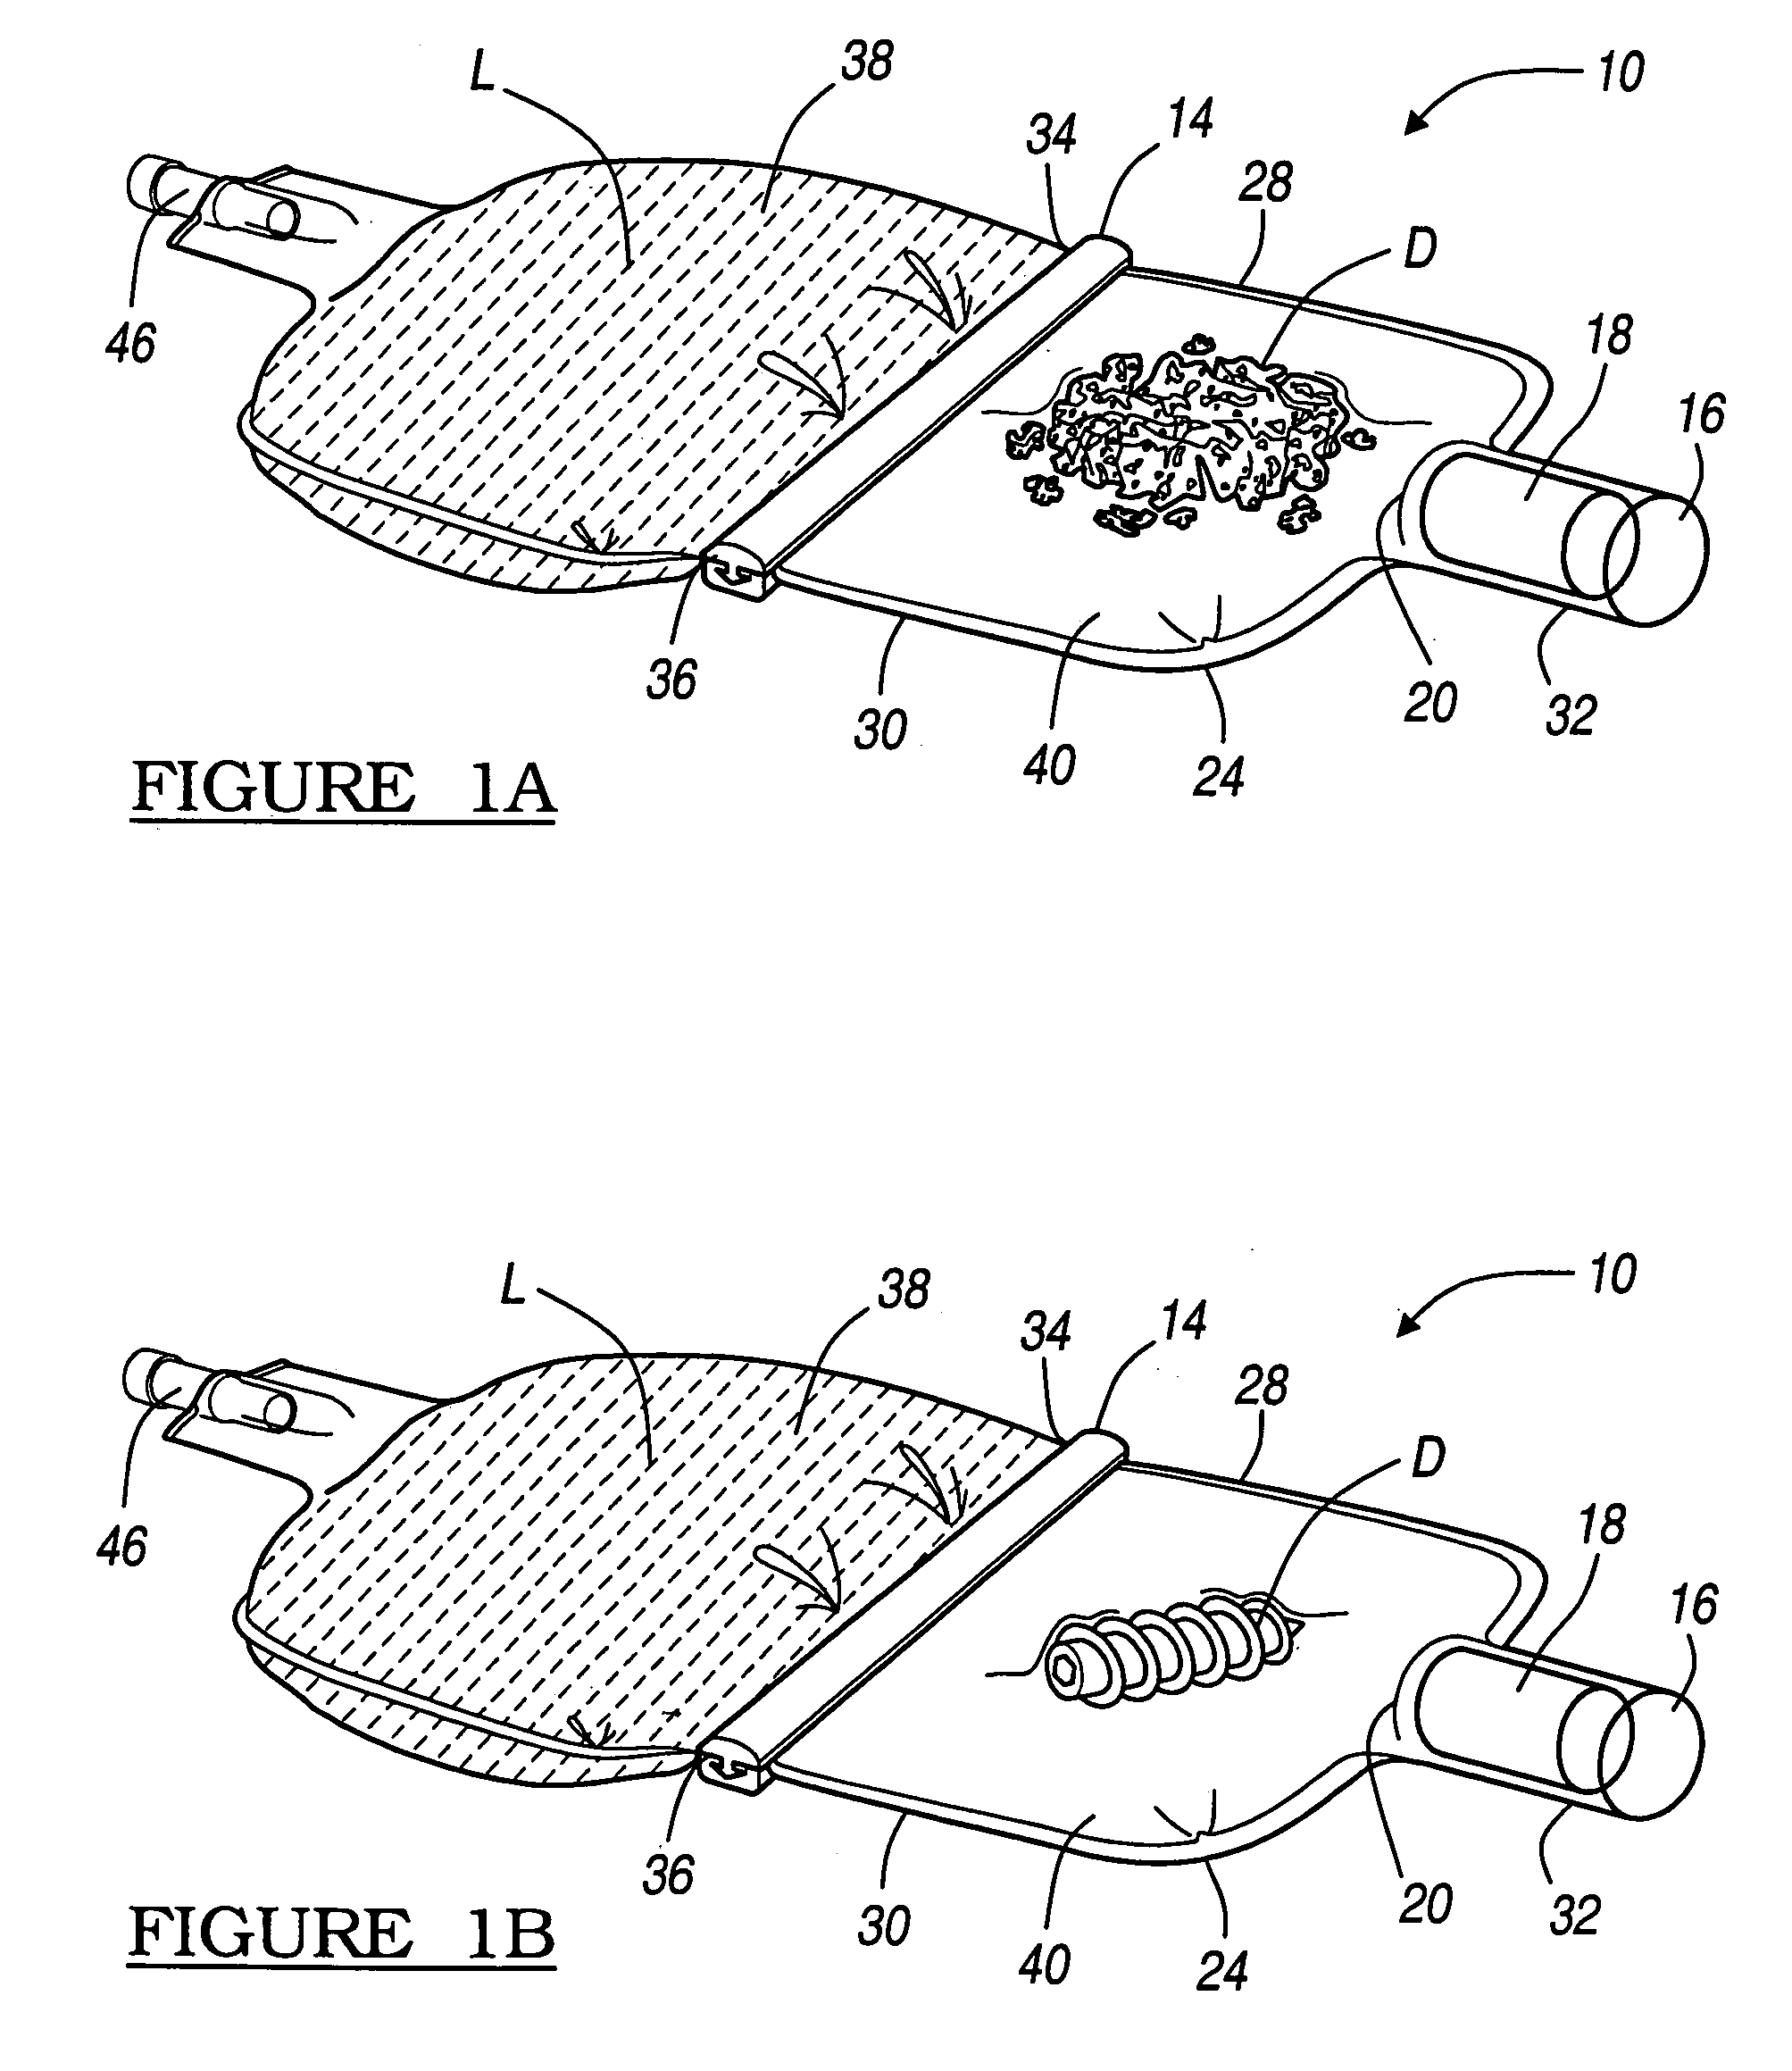 Device and method for hydrating and rehydrating orthopedic graft materials